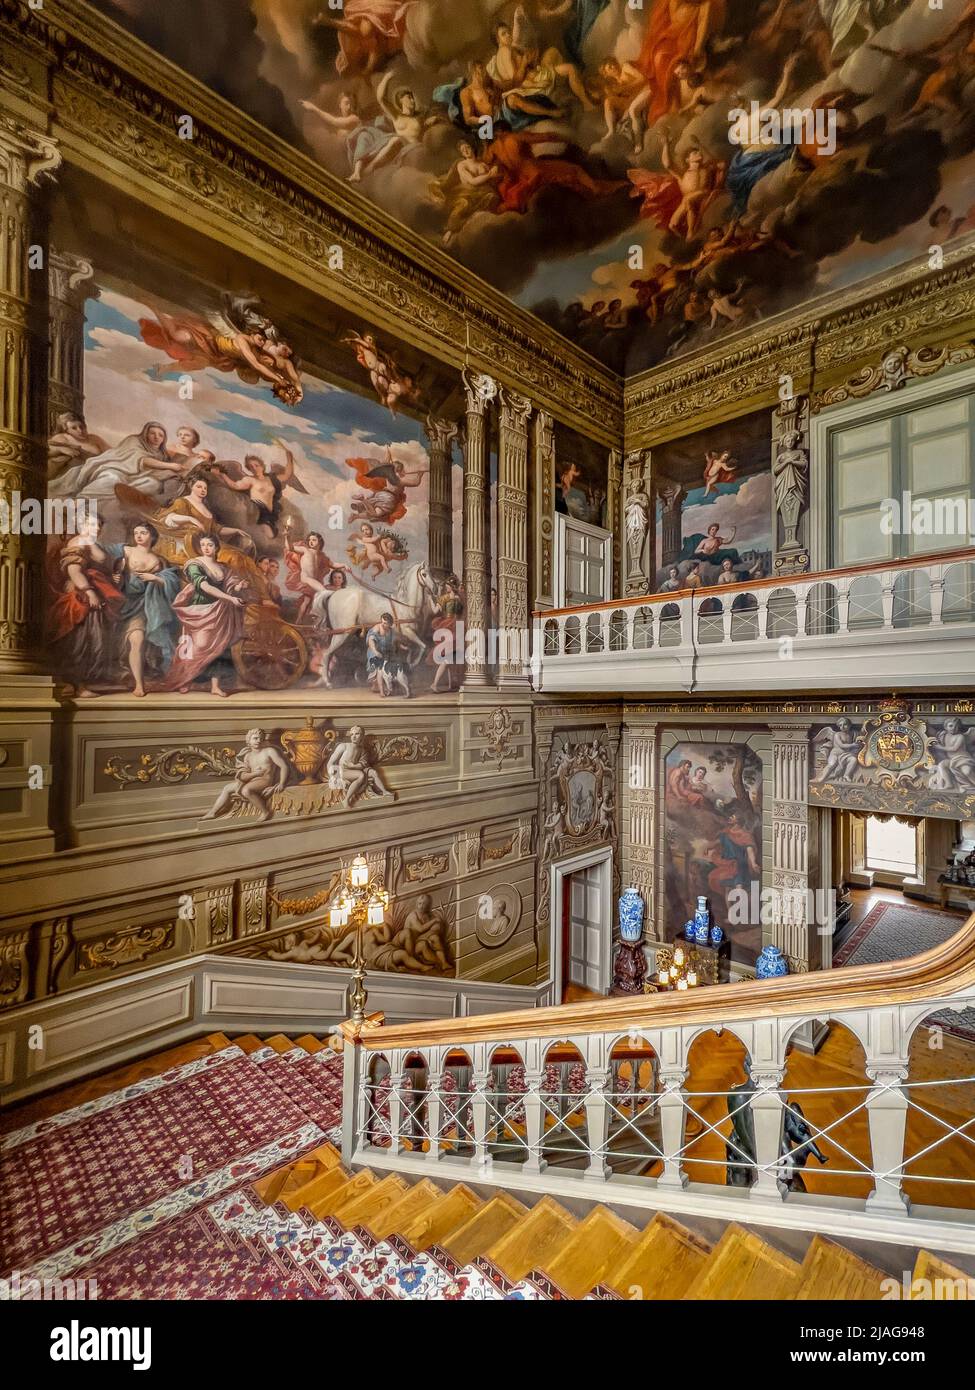 The Grand Staircase at Petworth House in West Sussex, United Kingdom.  Petworth is a late 17th-century Grade I listed country house, rebuilt in 1688 b Stock Photo